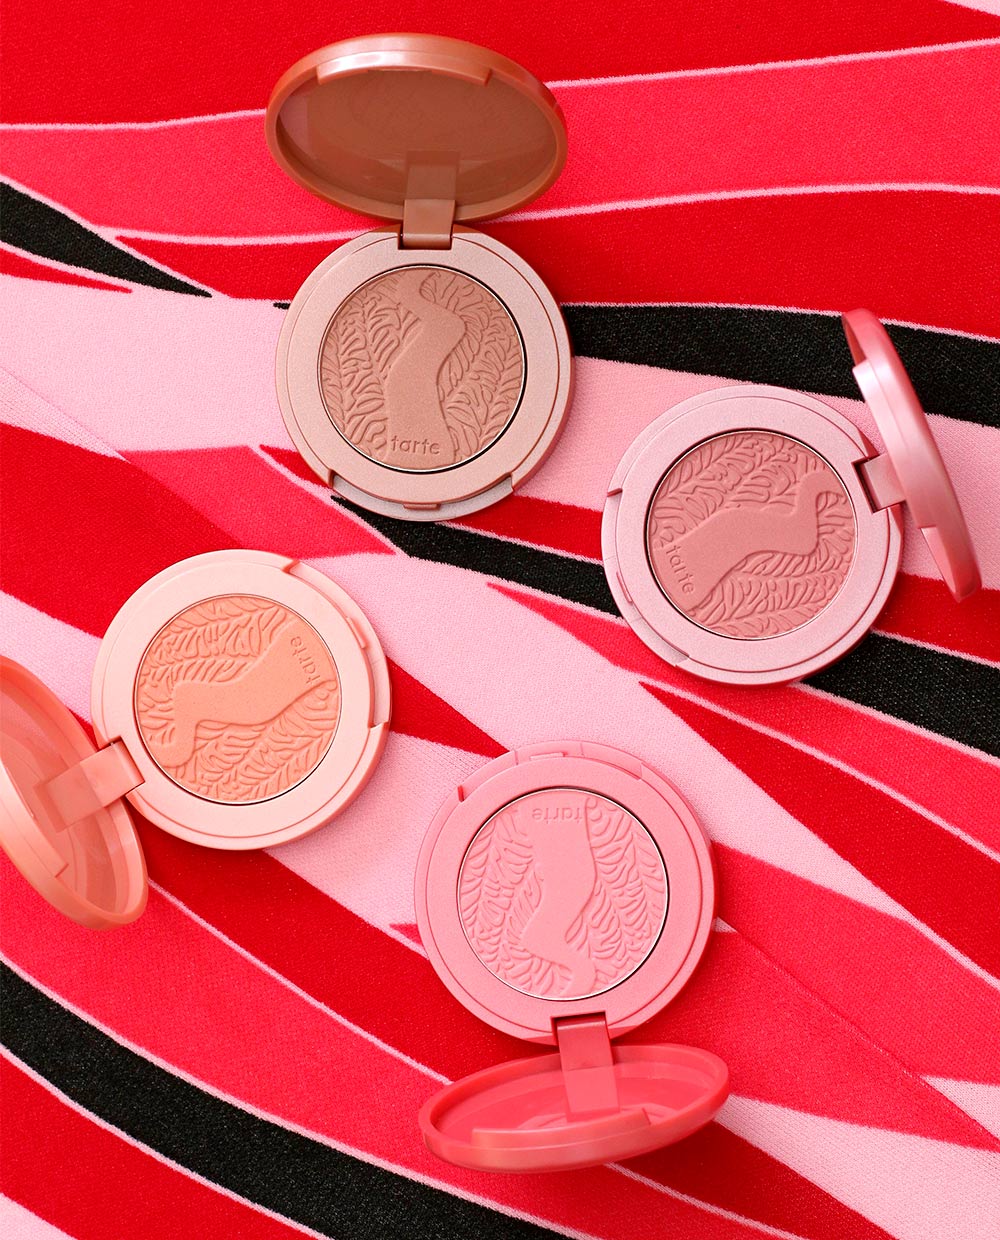 tarte holiday 2016 sculpted cheeks